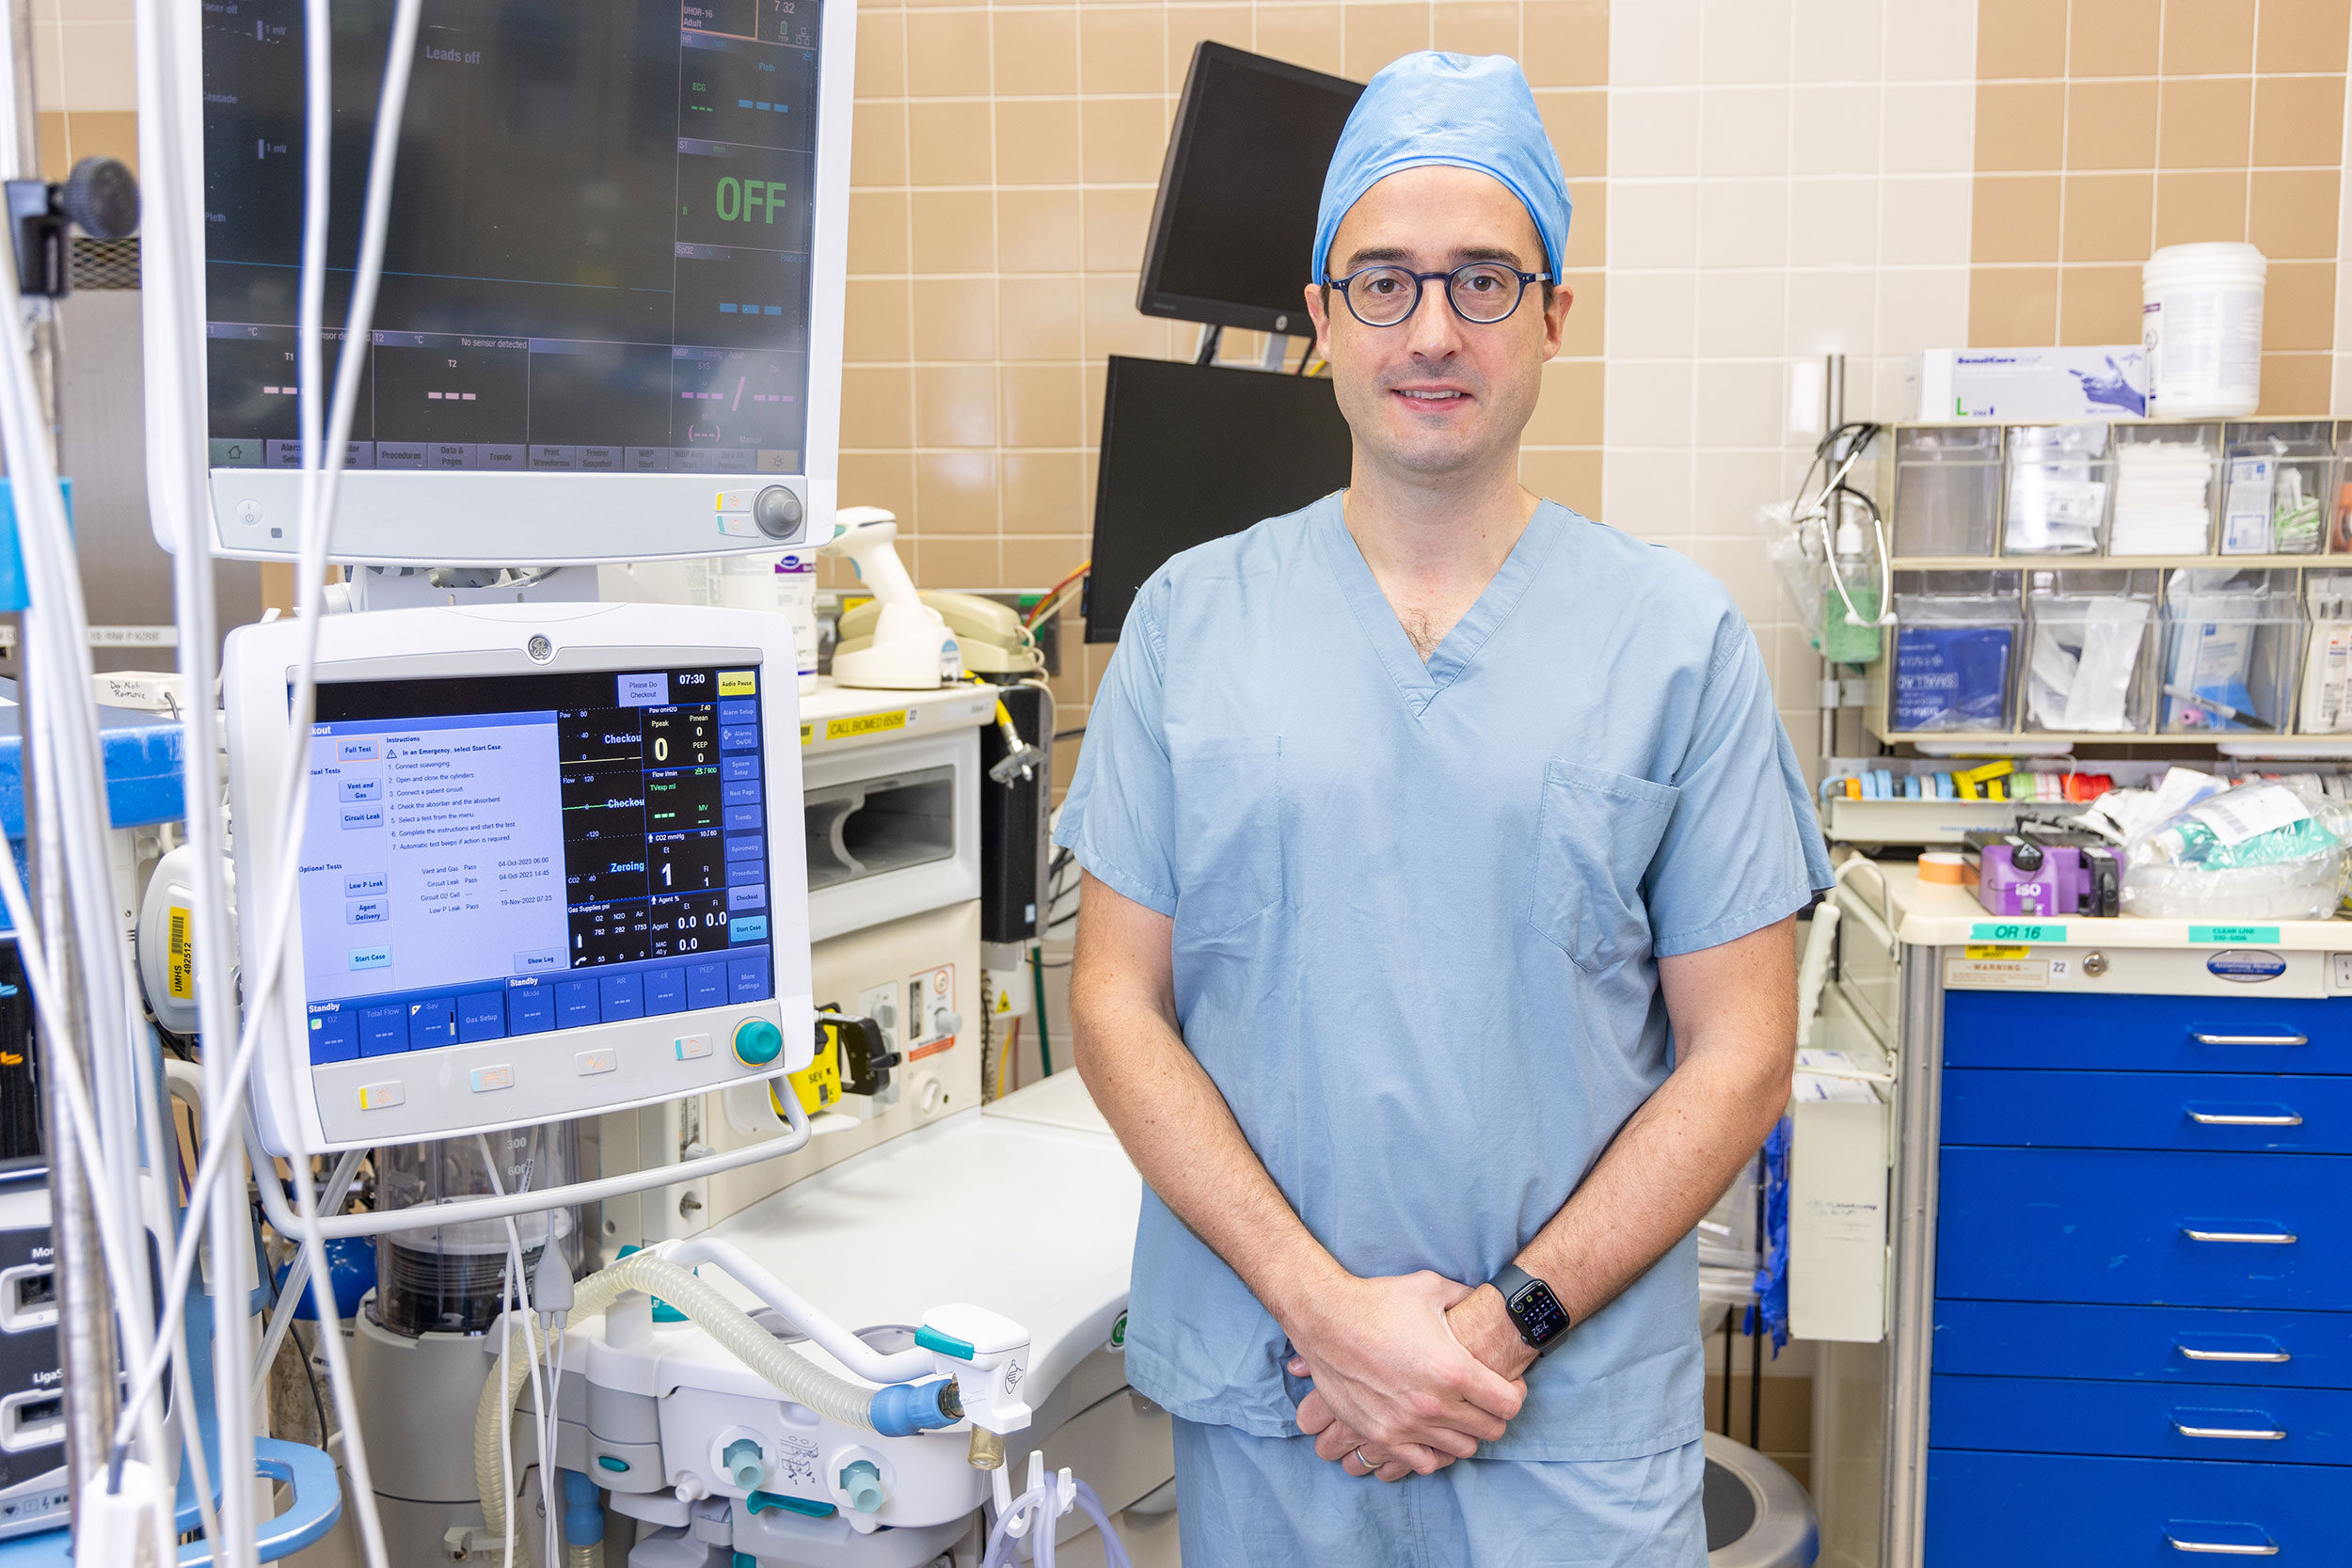 David Hovord, assistant professor of anesthesiology and one of the project leads for the Green Anesthesia Initiative, is shown in an operating room with an anesthesia machine in the background.